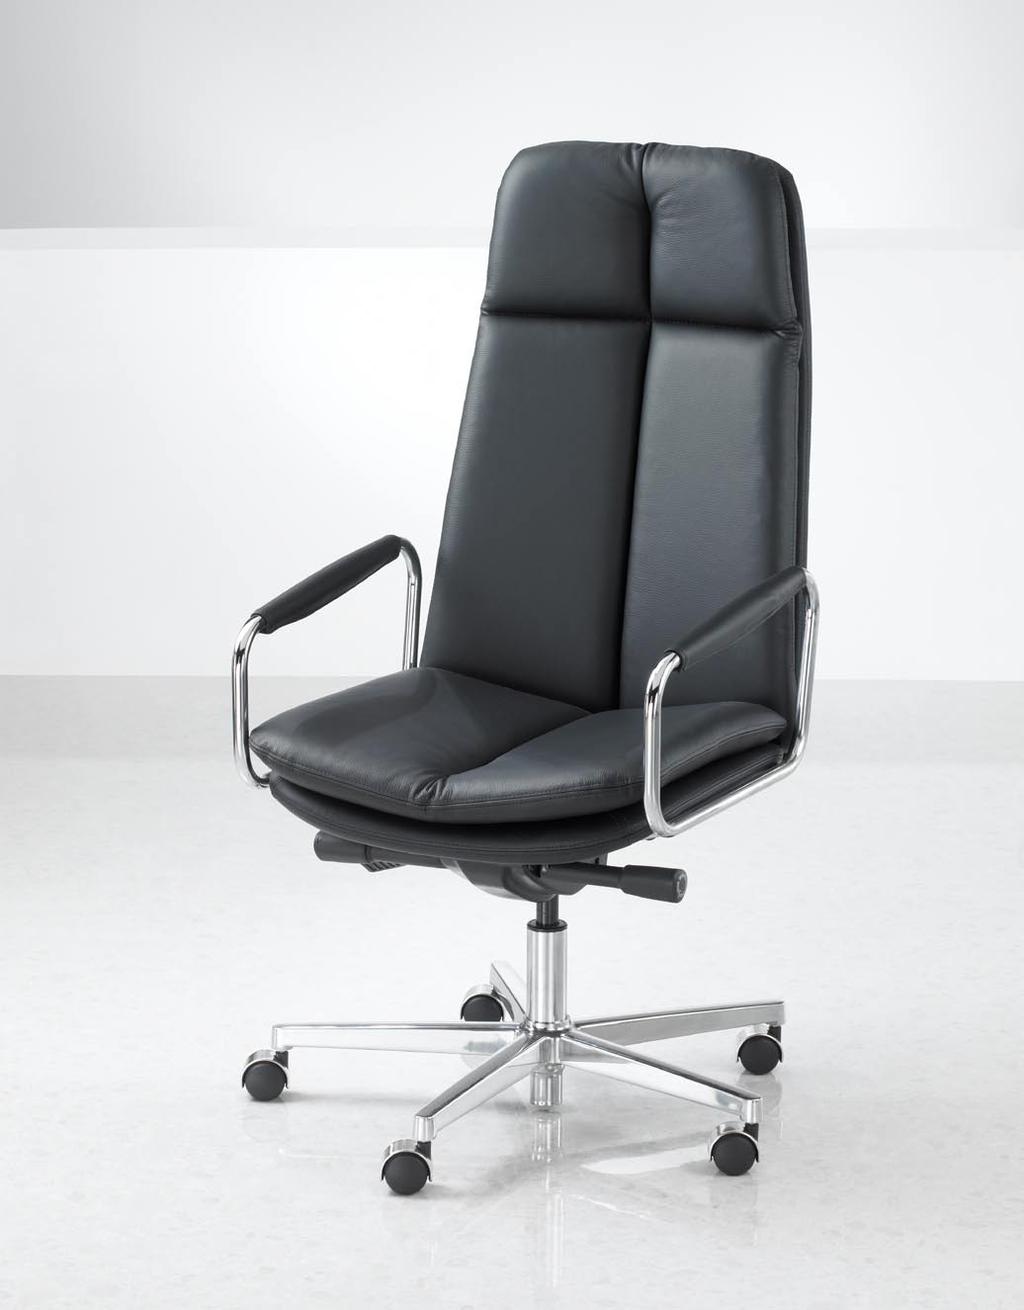 Executive AND CONFERENCE Chairs Ele Executive and Conference Chairs Ele executive working chairs have independent seats and backs and are fitted with a